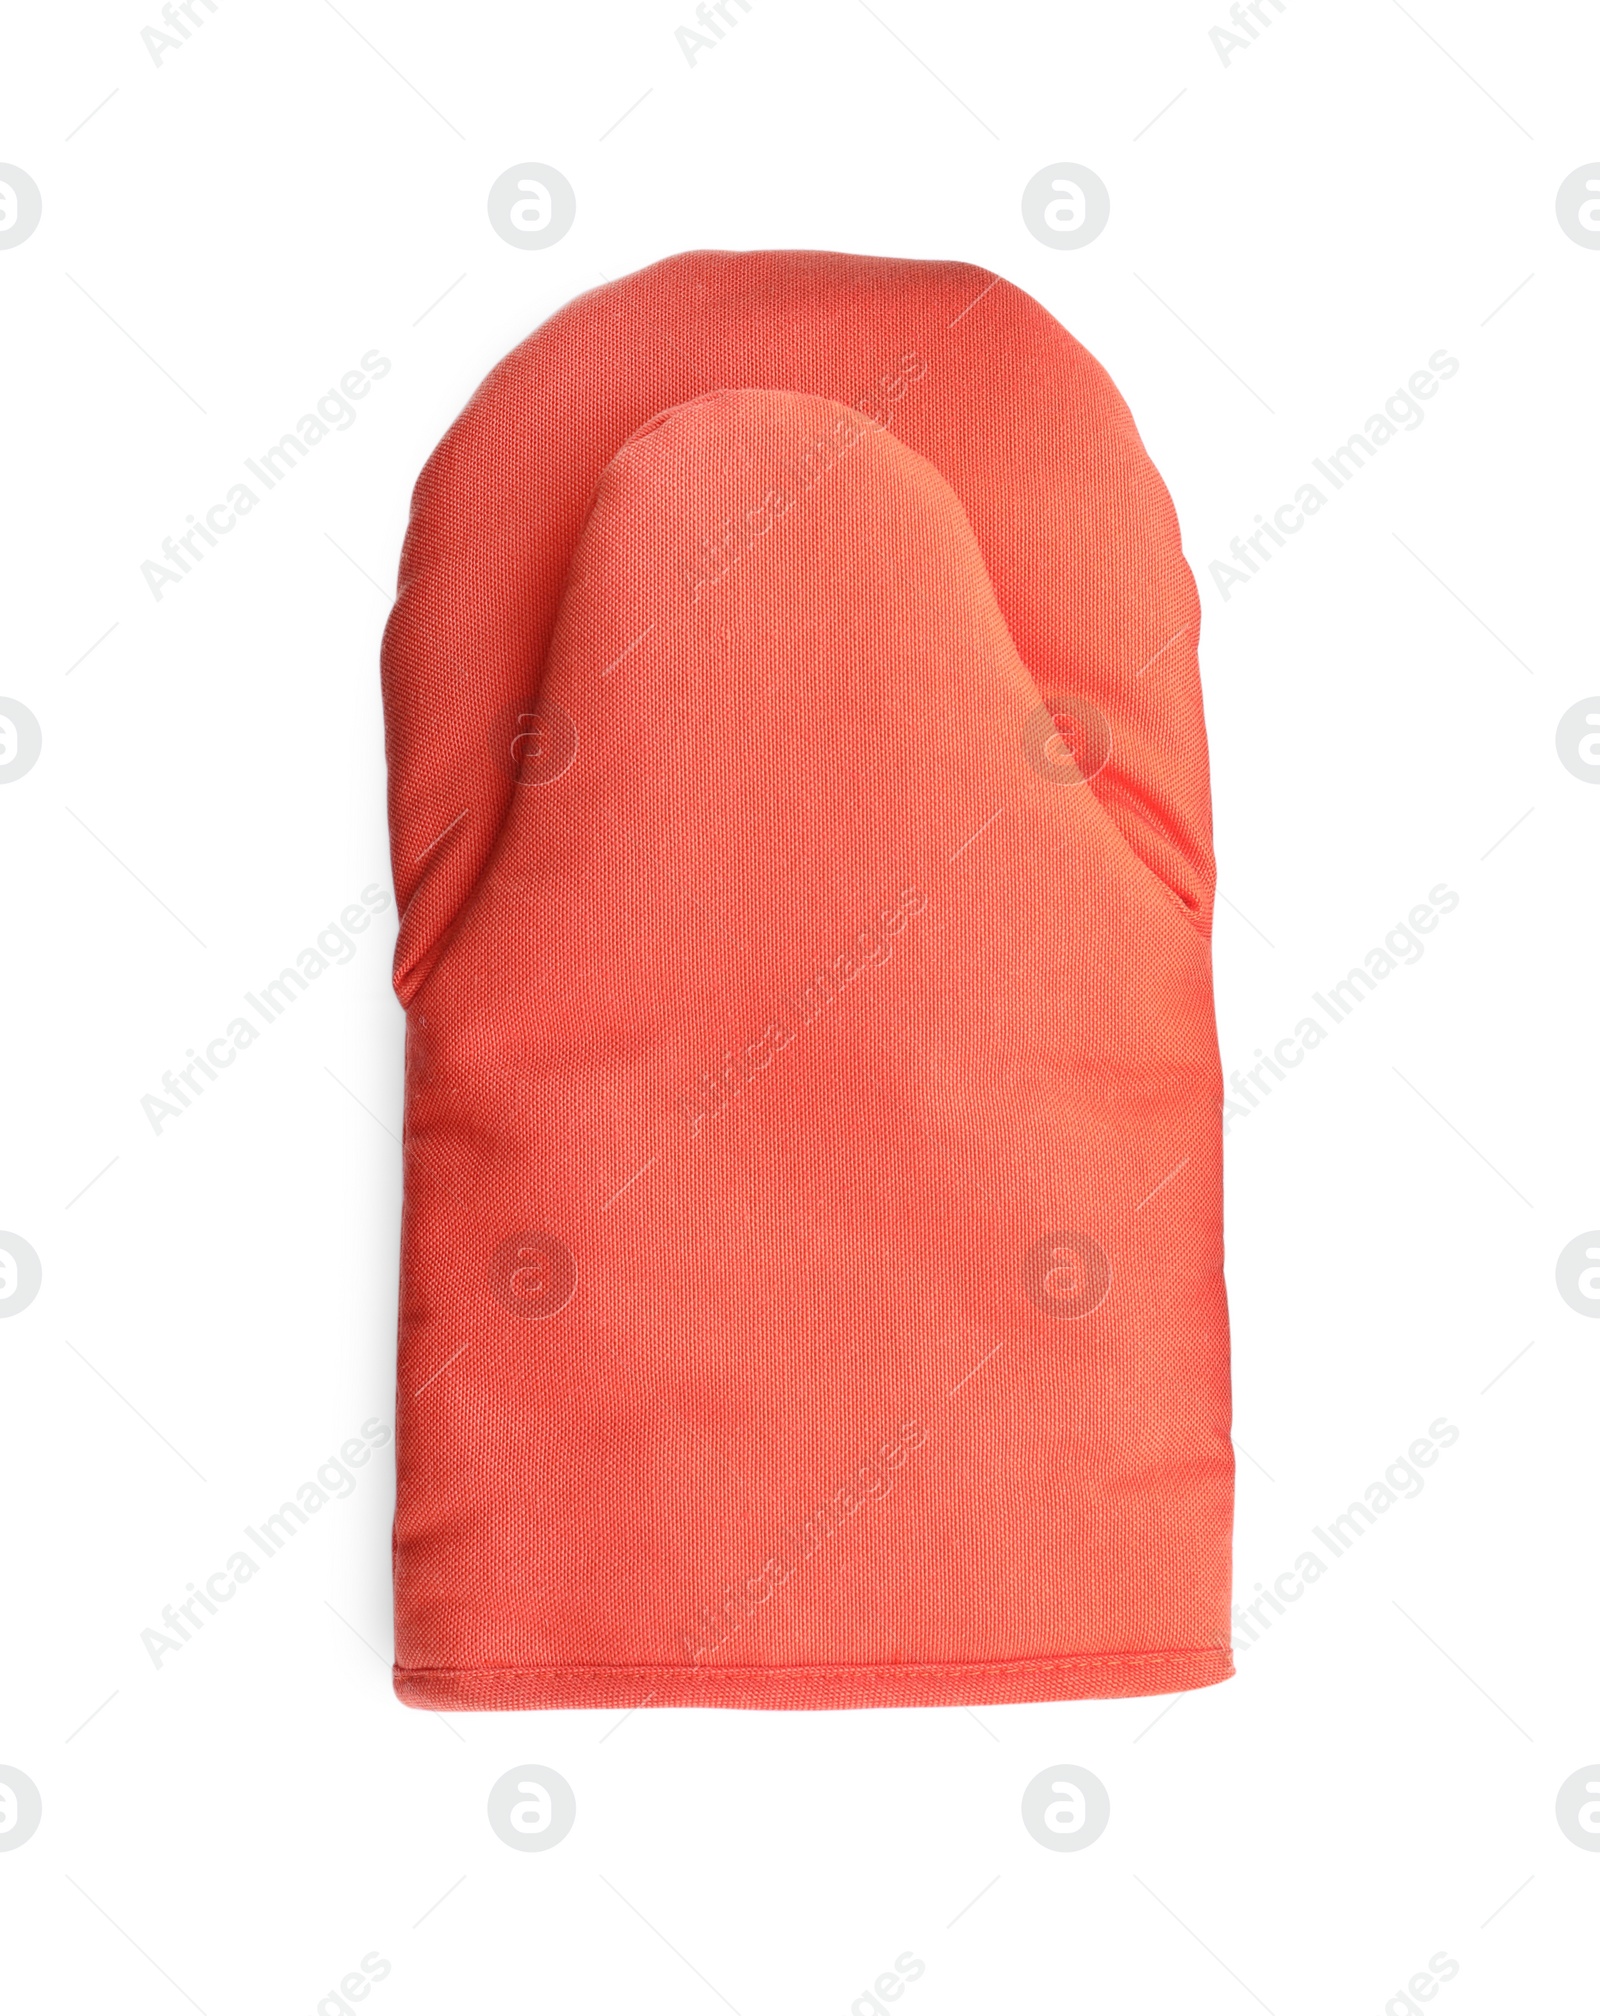 Photo of Oven glove for hot dishes isolated on white, top view